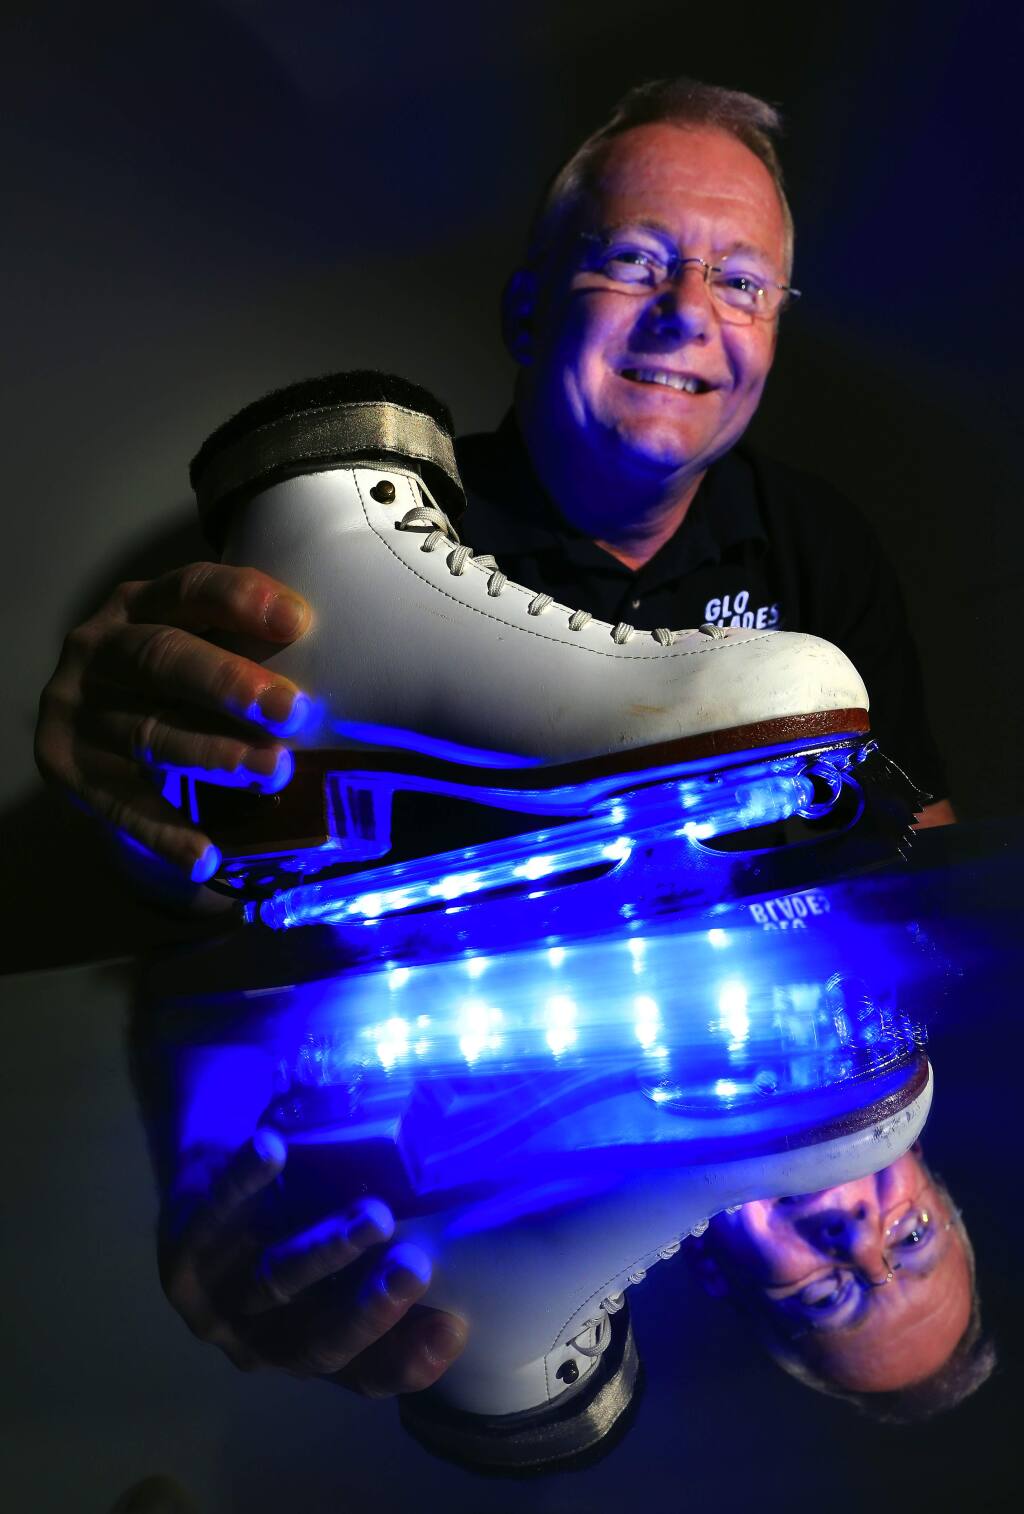 Ralph Haney invented 'Glo-Blades,' a color-changing led light system for ice skatess. (JOHN BURGESS / The Press Democrat)